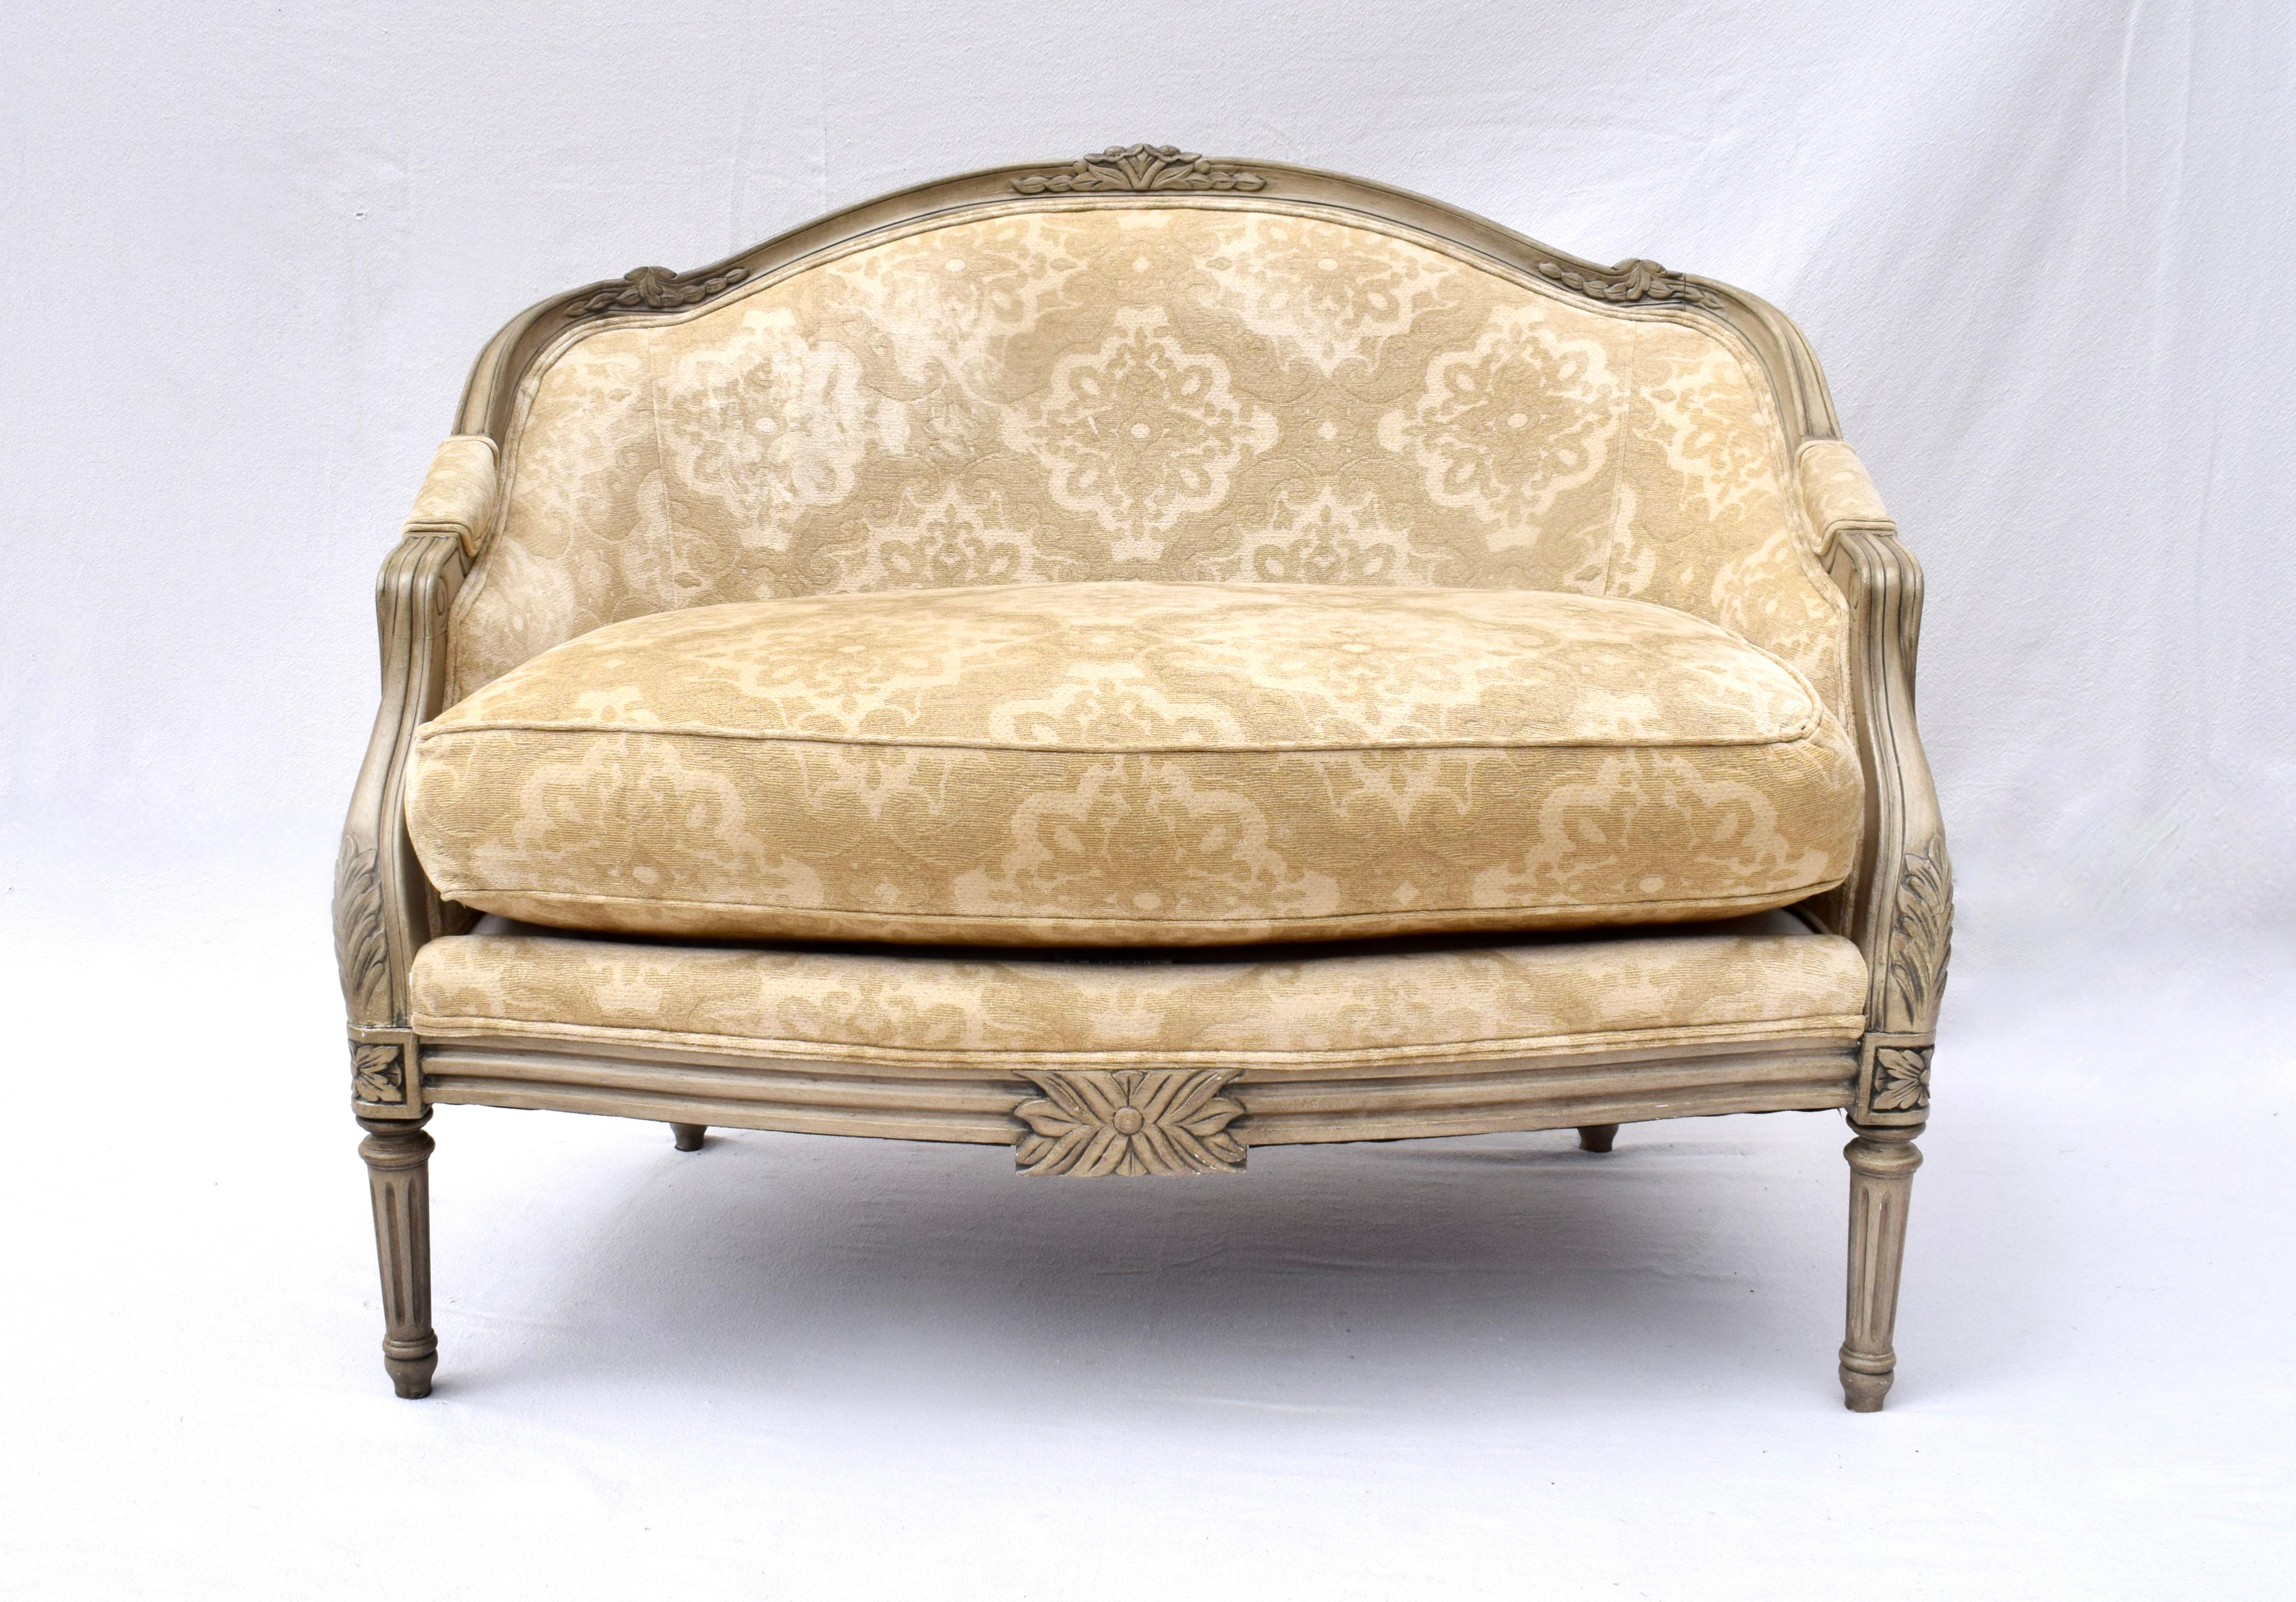 American French Louis XvI Style Marquise Chair & Ottoman For Sale